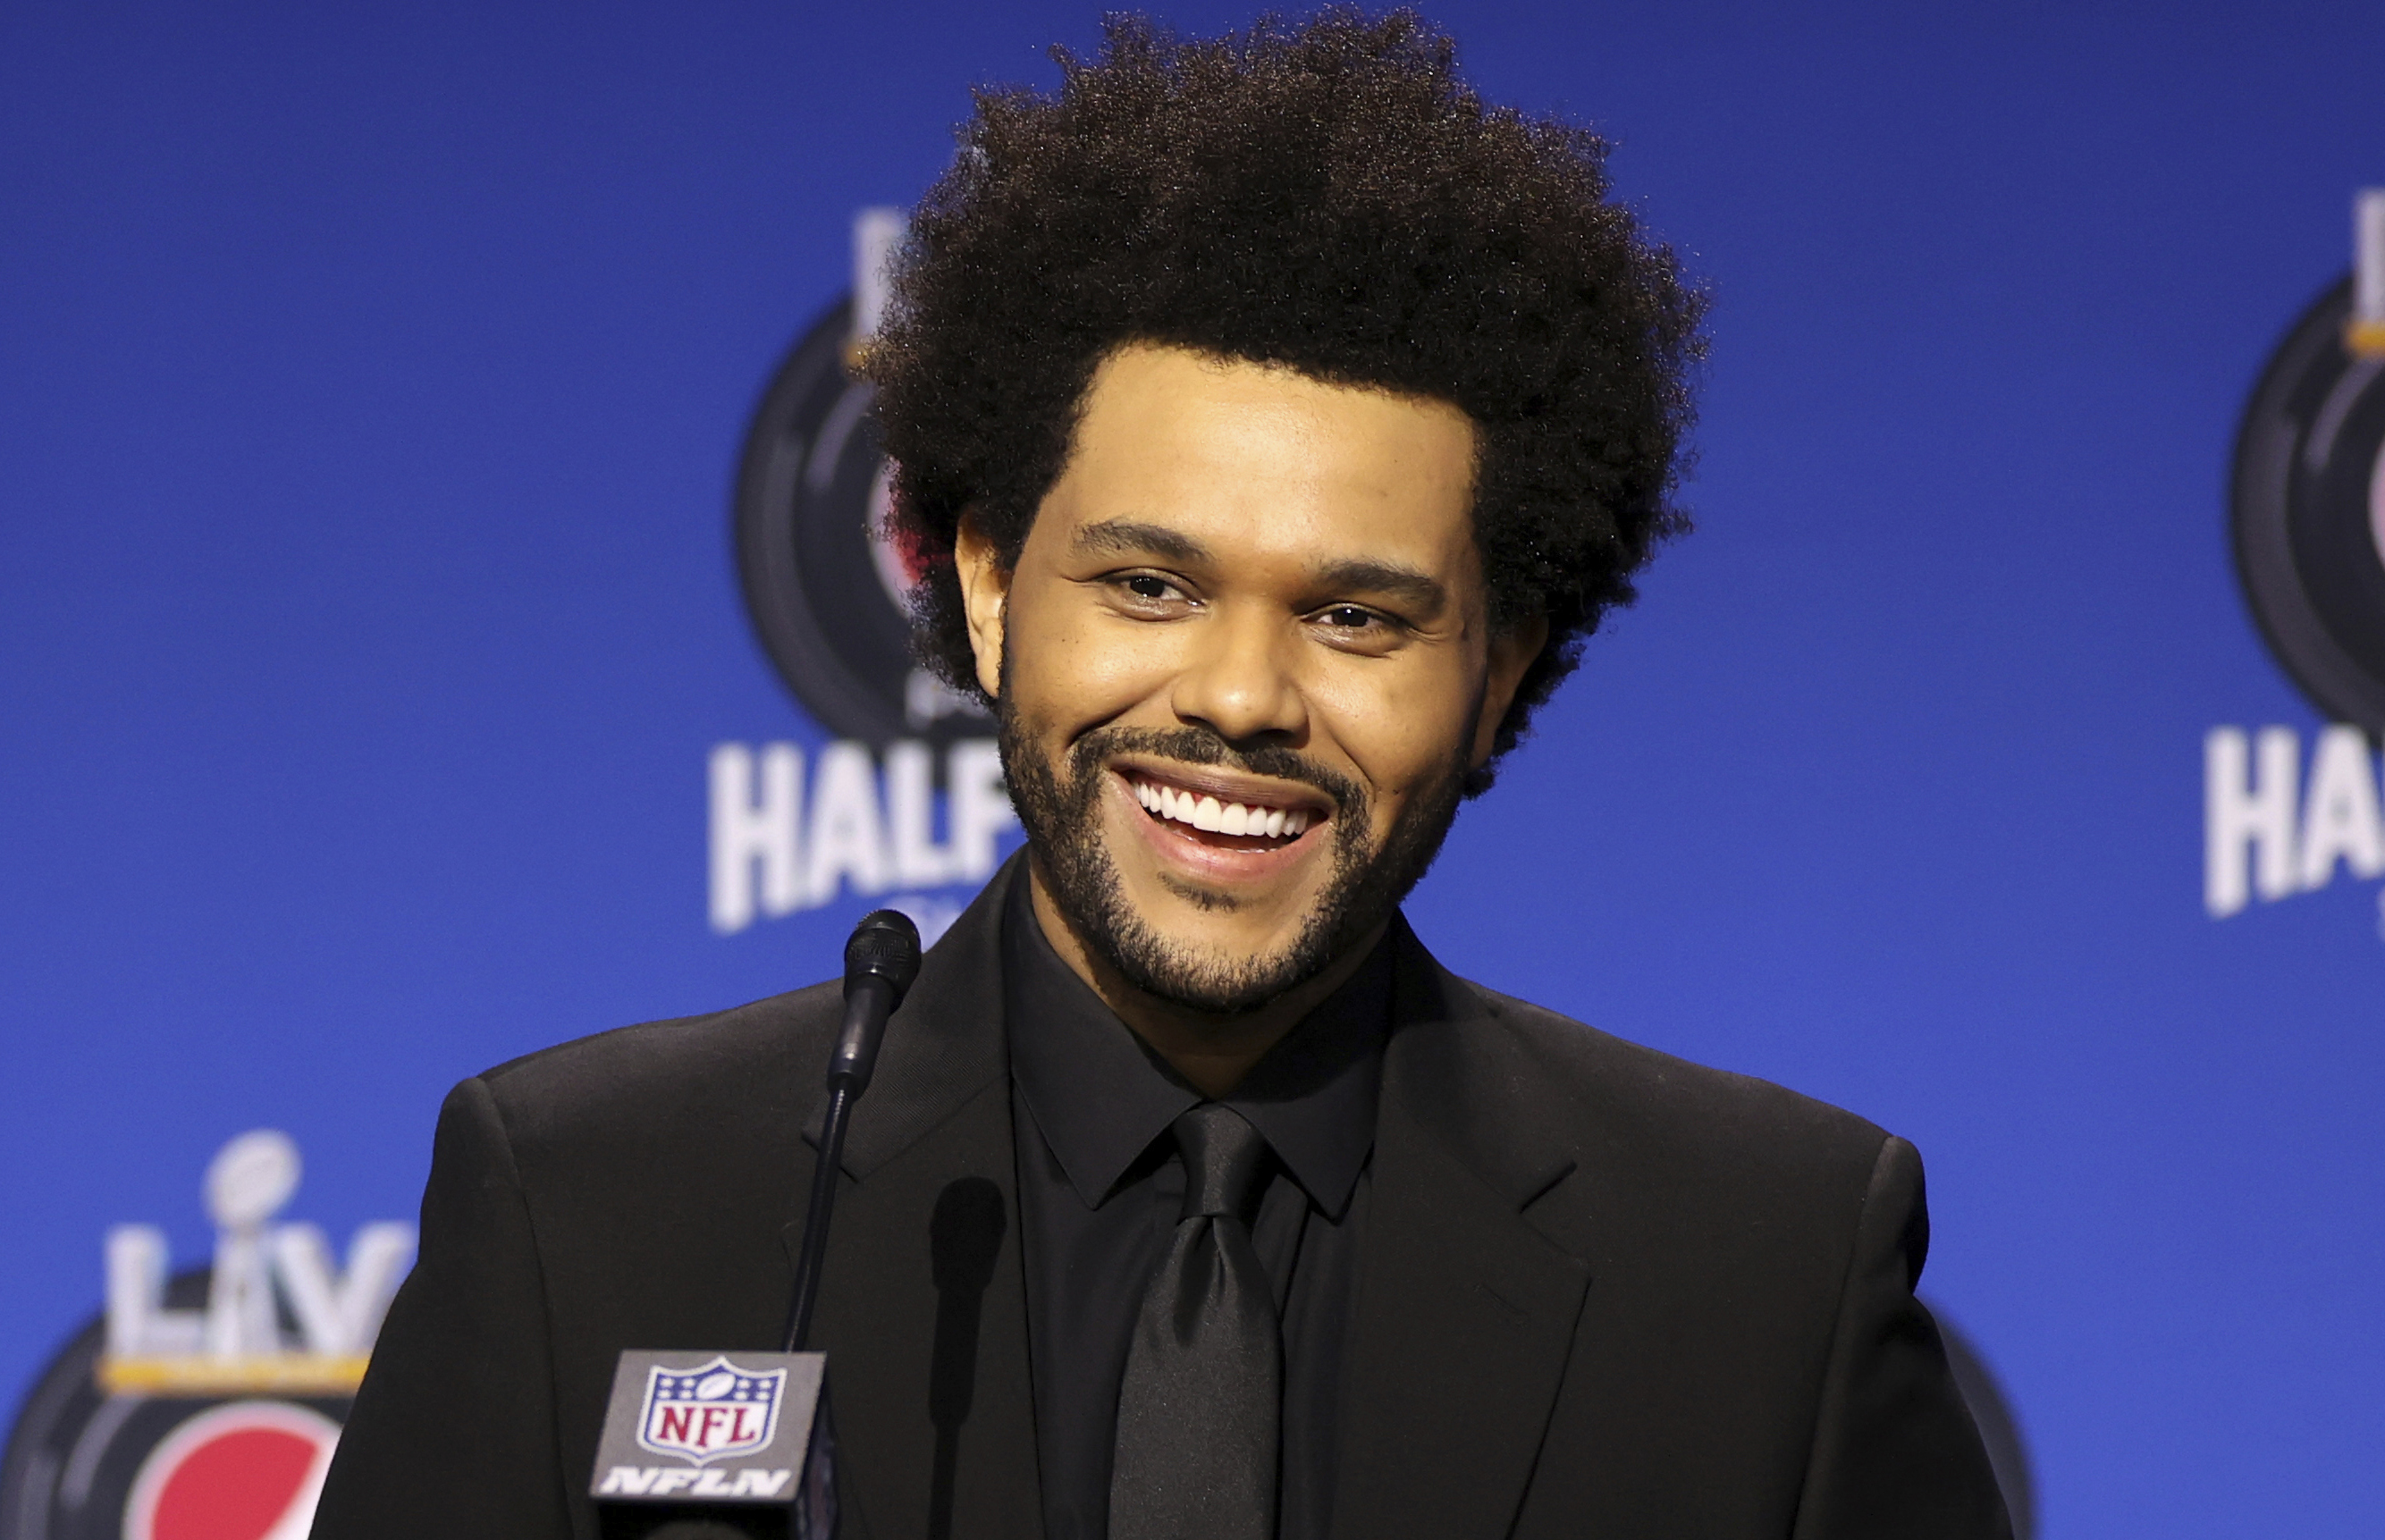 Full Story Behind The Weeknd's Face Bandages at Super Bowl LV